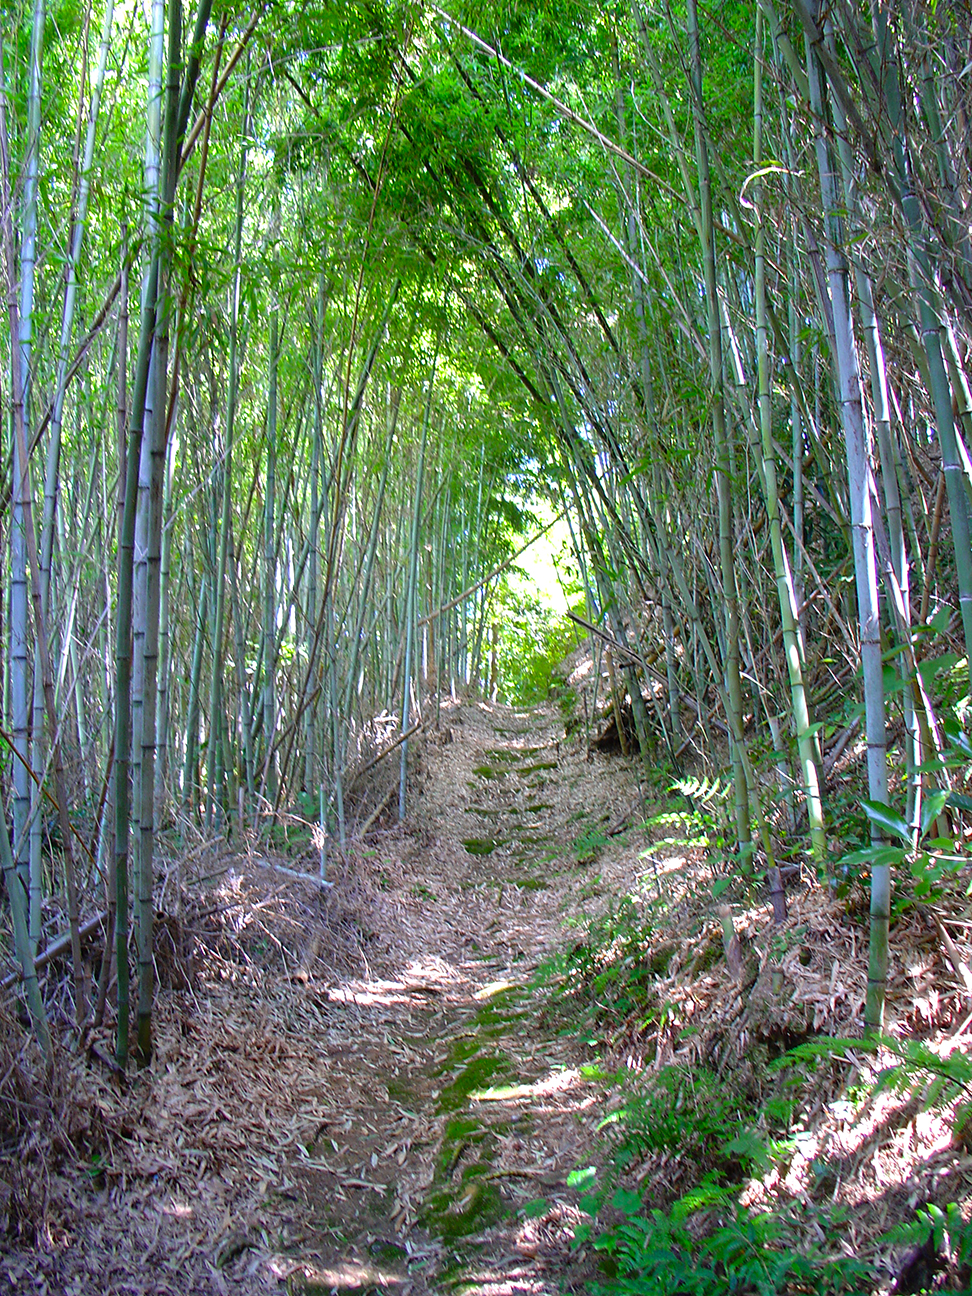 A nearby bamboo forest.